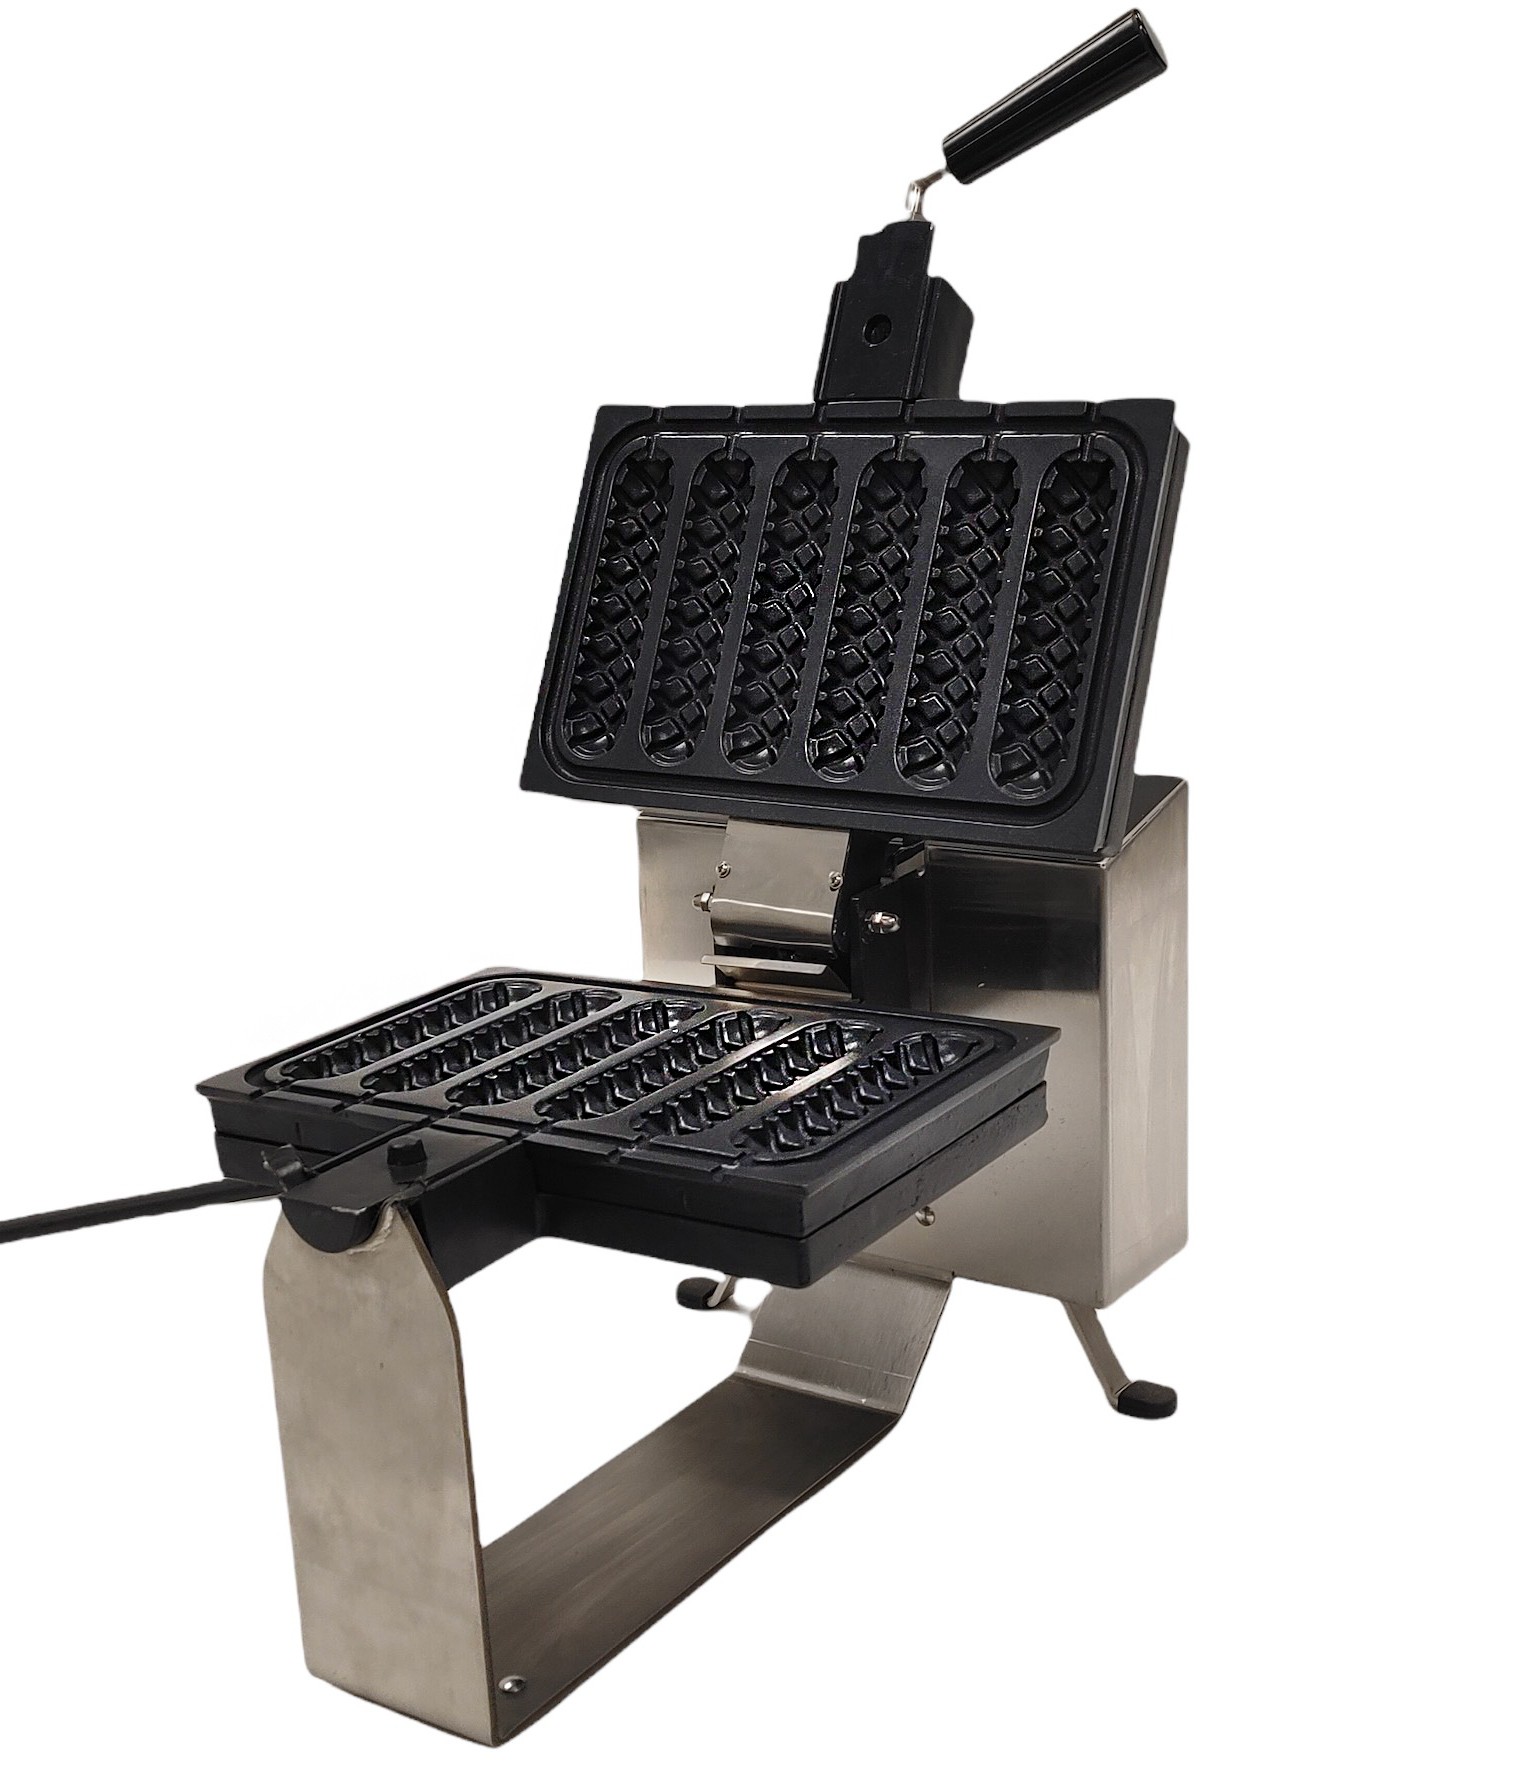 Lolly Waffle Maker Piastra elettrica antiaderente per waffle,1750W électrique Muffin gaufre machine Lolly gaufrier 